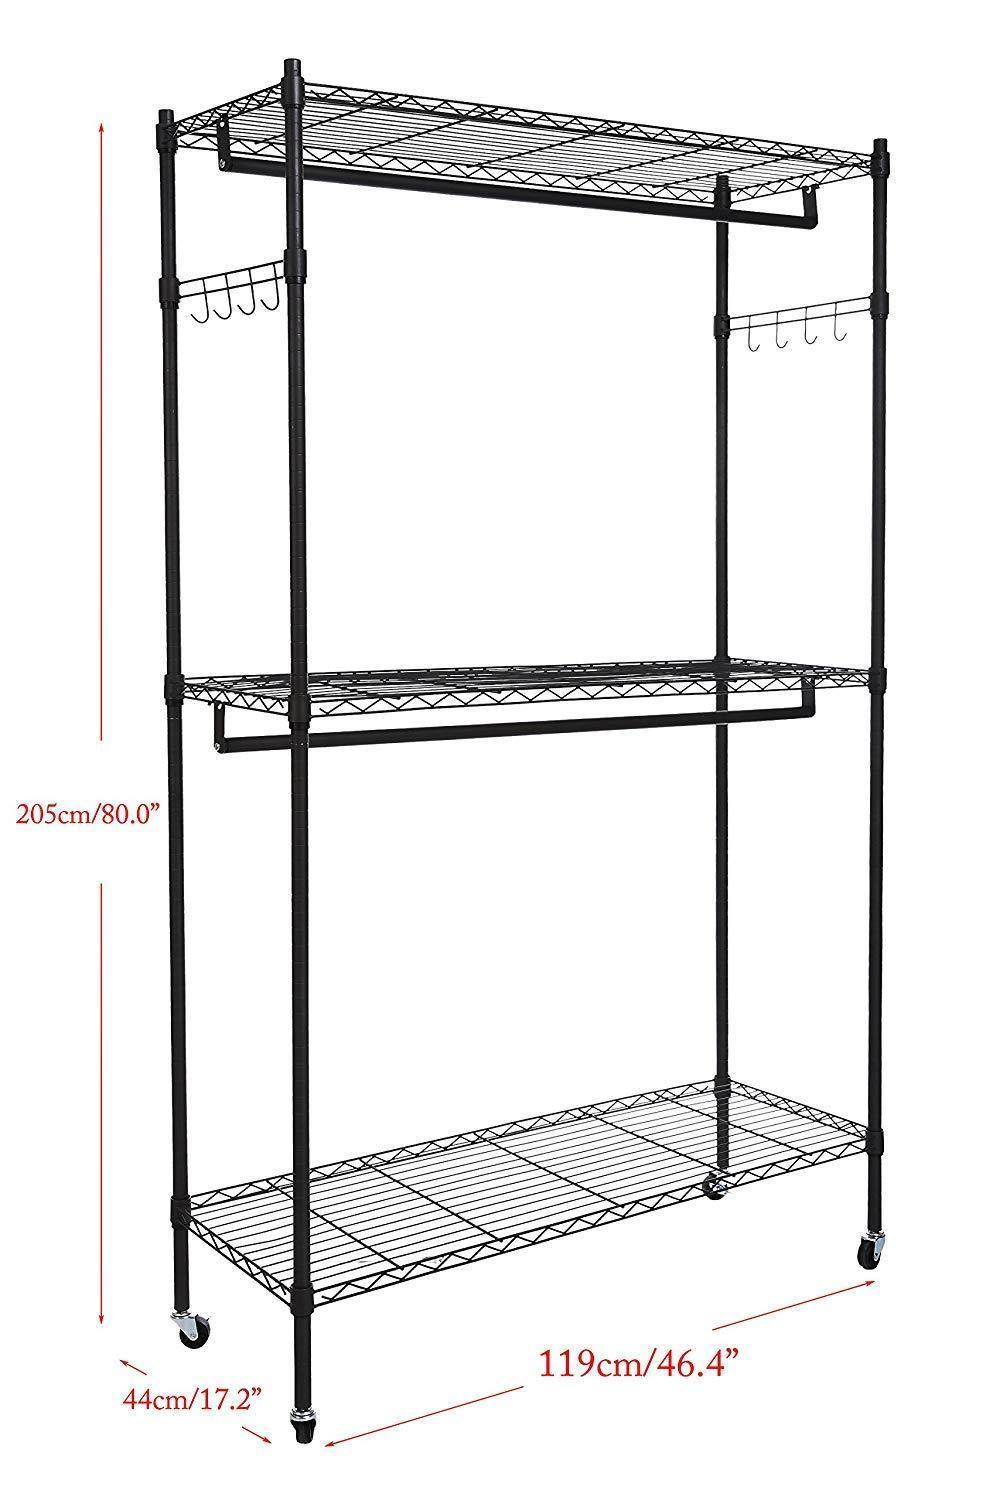 Explore miageek heavy duty garment rack rolling clothes rack free standing shelving wardrobe clothes closet storage organizer with hanging rods and lockable wheels black two pair hook